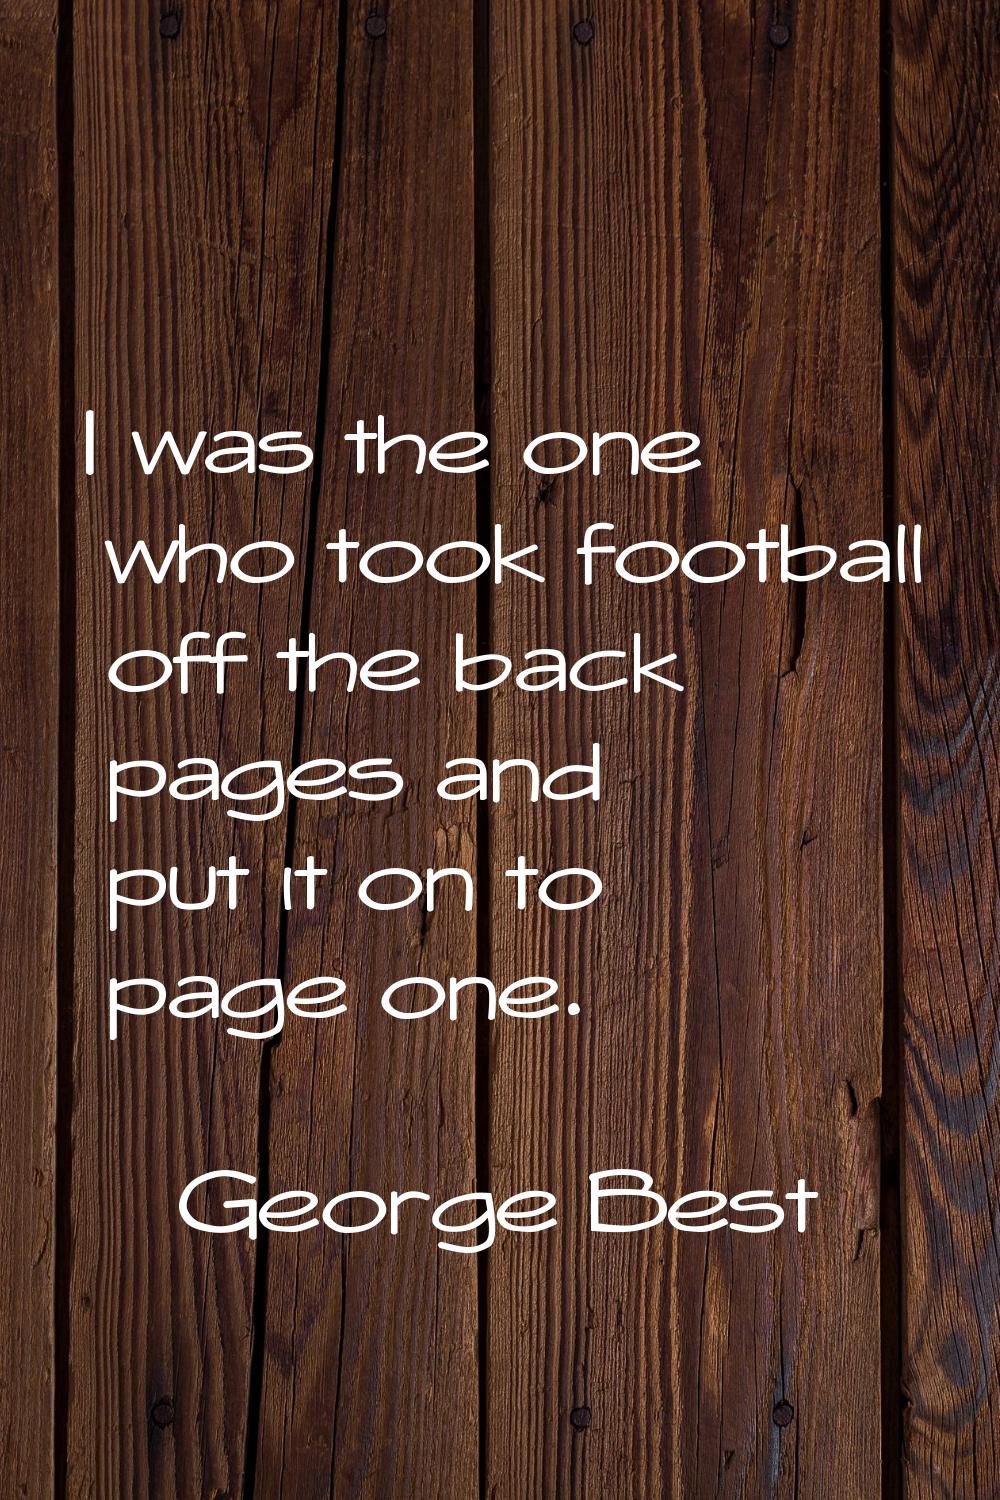 I was the one who took football off the back pages and put it on to page one.